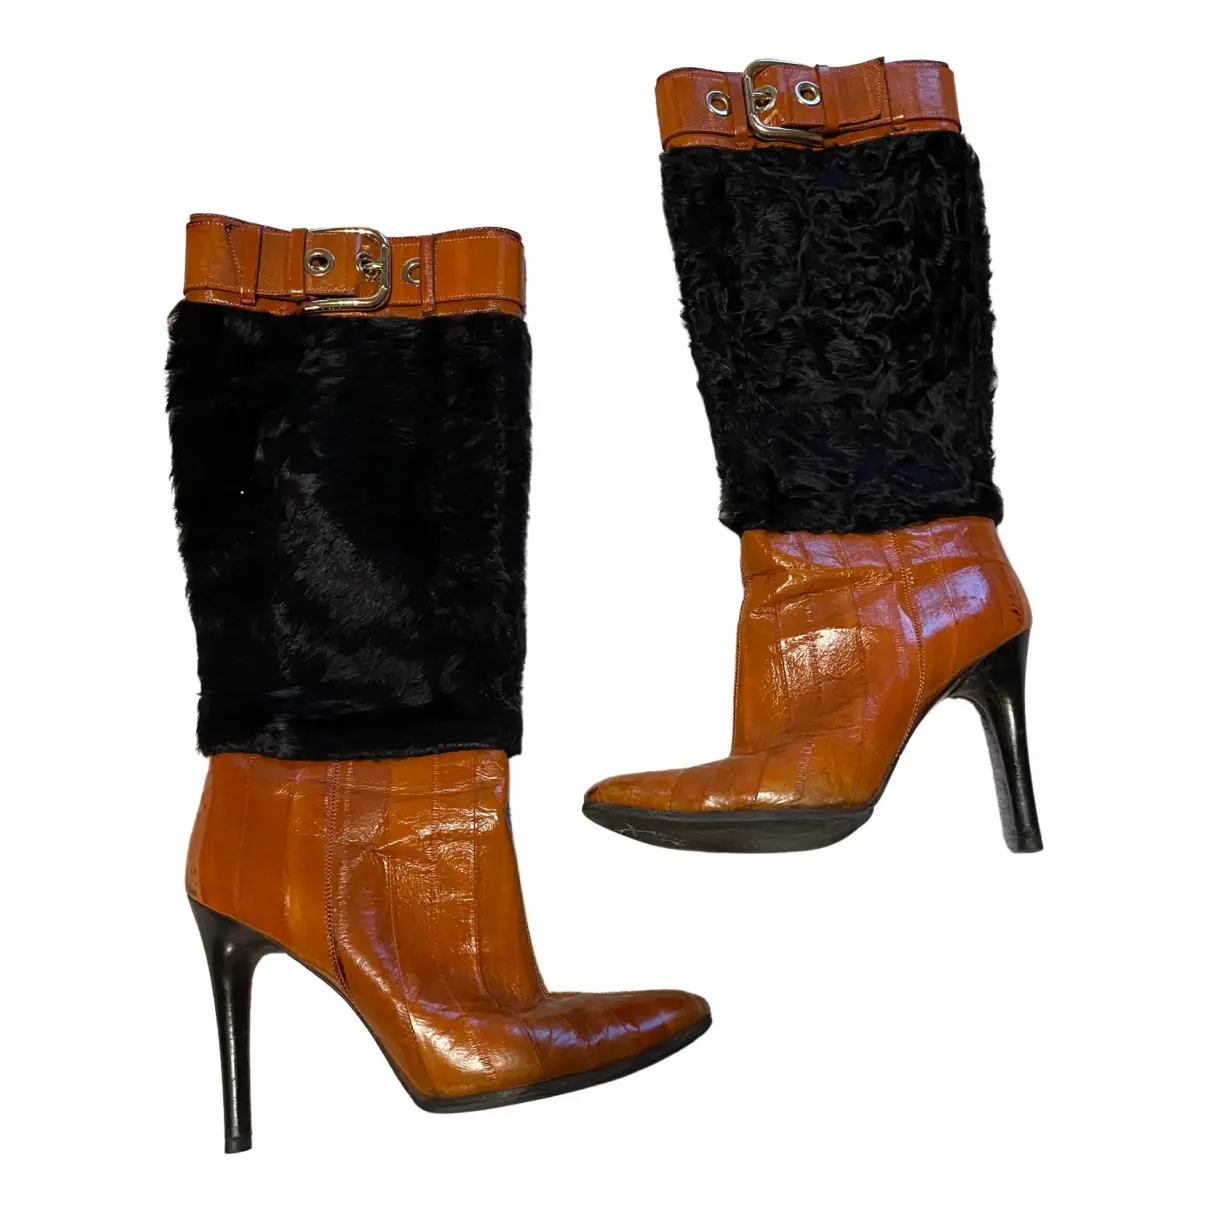 Patent leather boots Dolce & Gabbana - Vintage